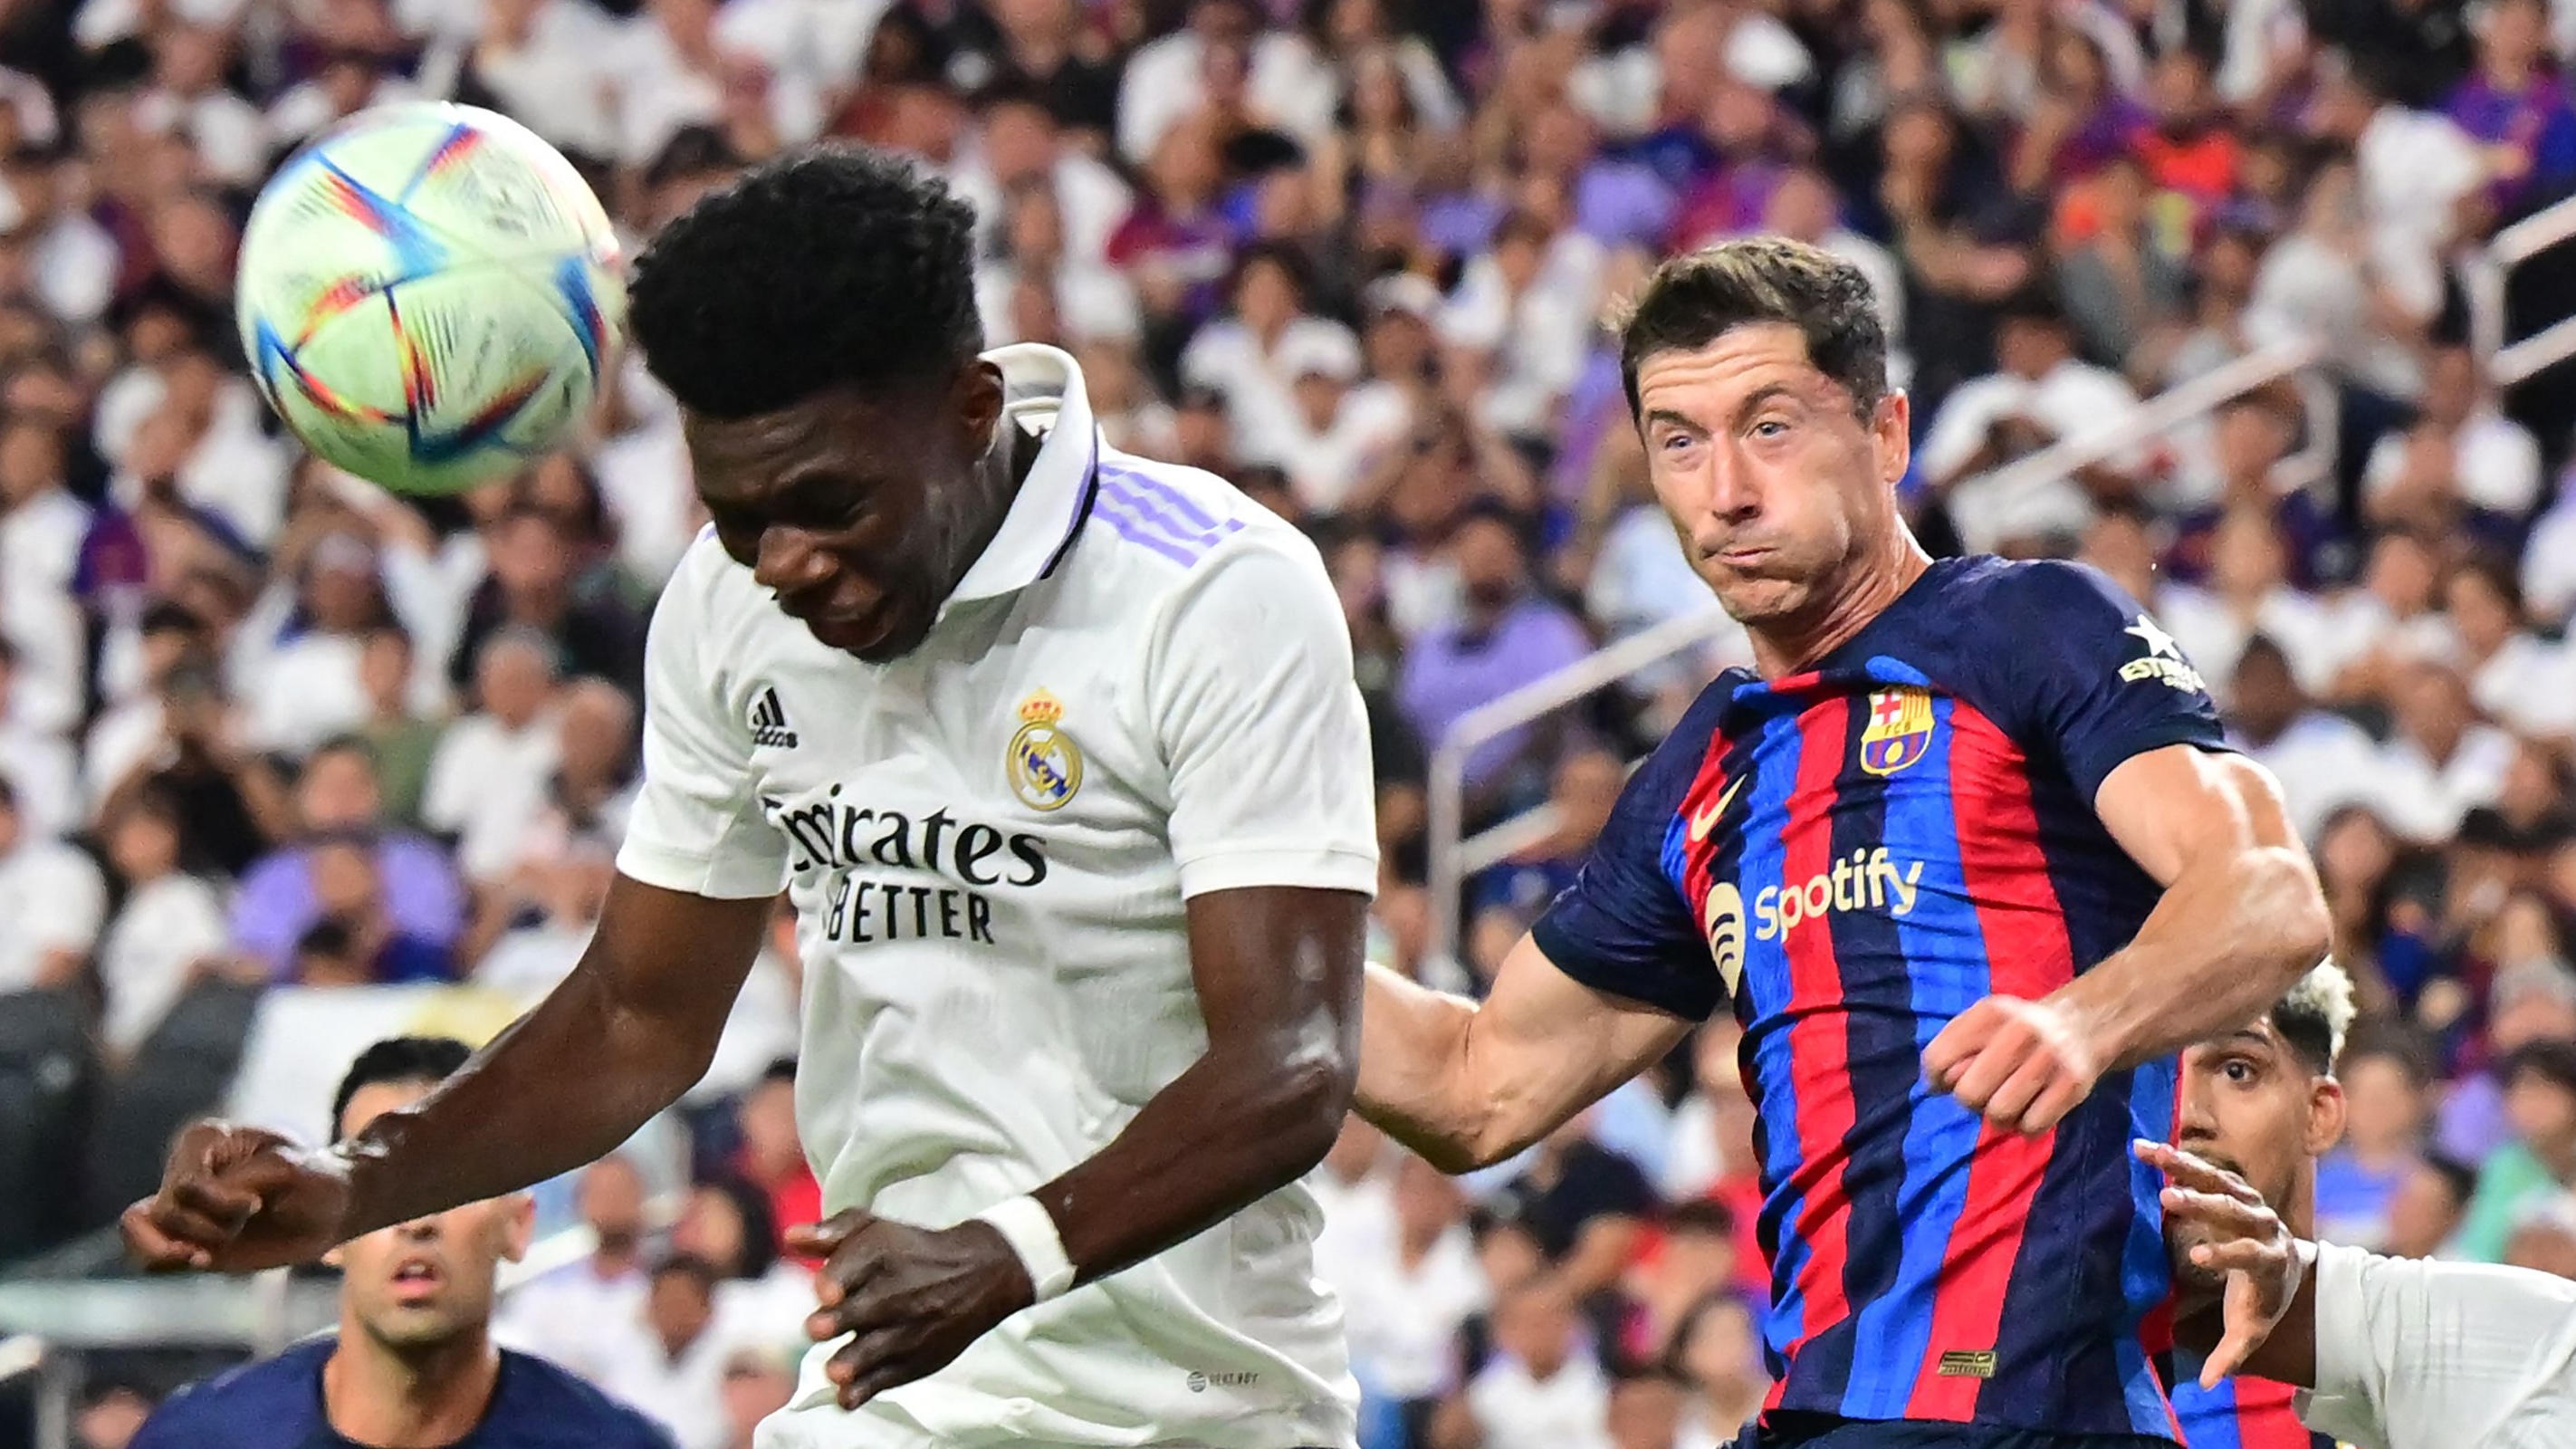 Real Madrid vs Barcelona live stream how to watch Copa del Rey semi-final online for free today